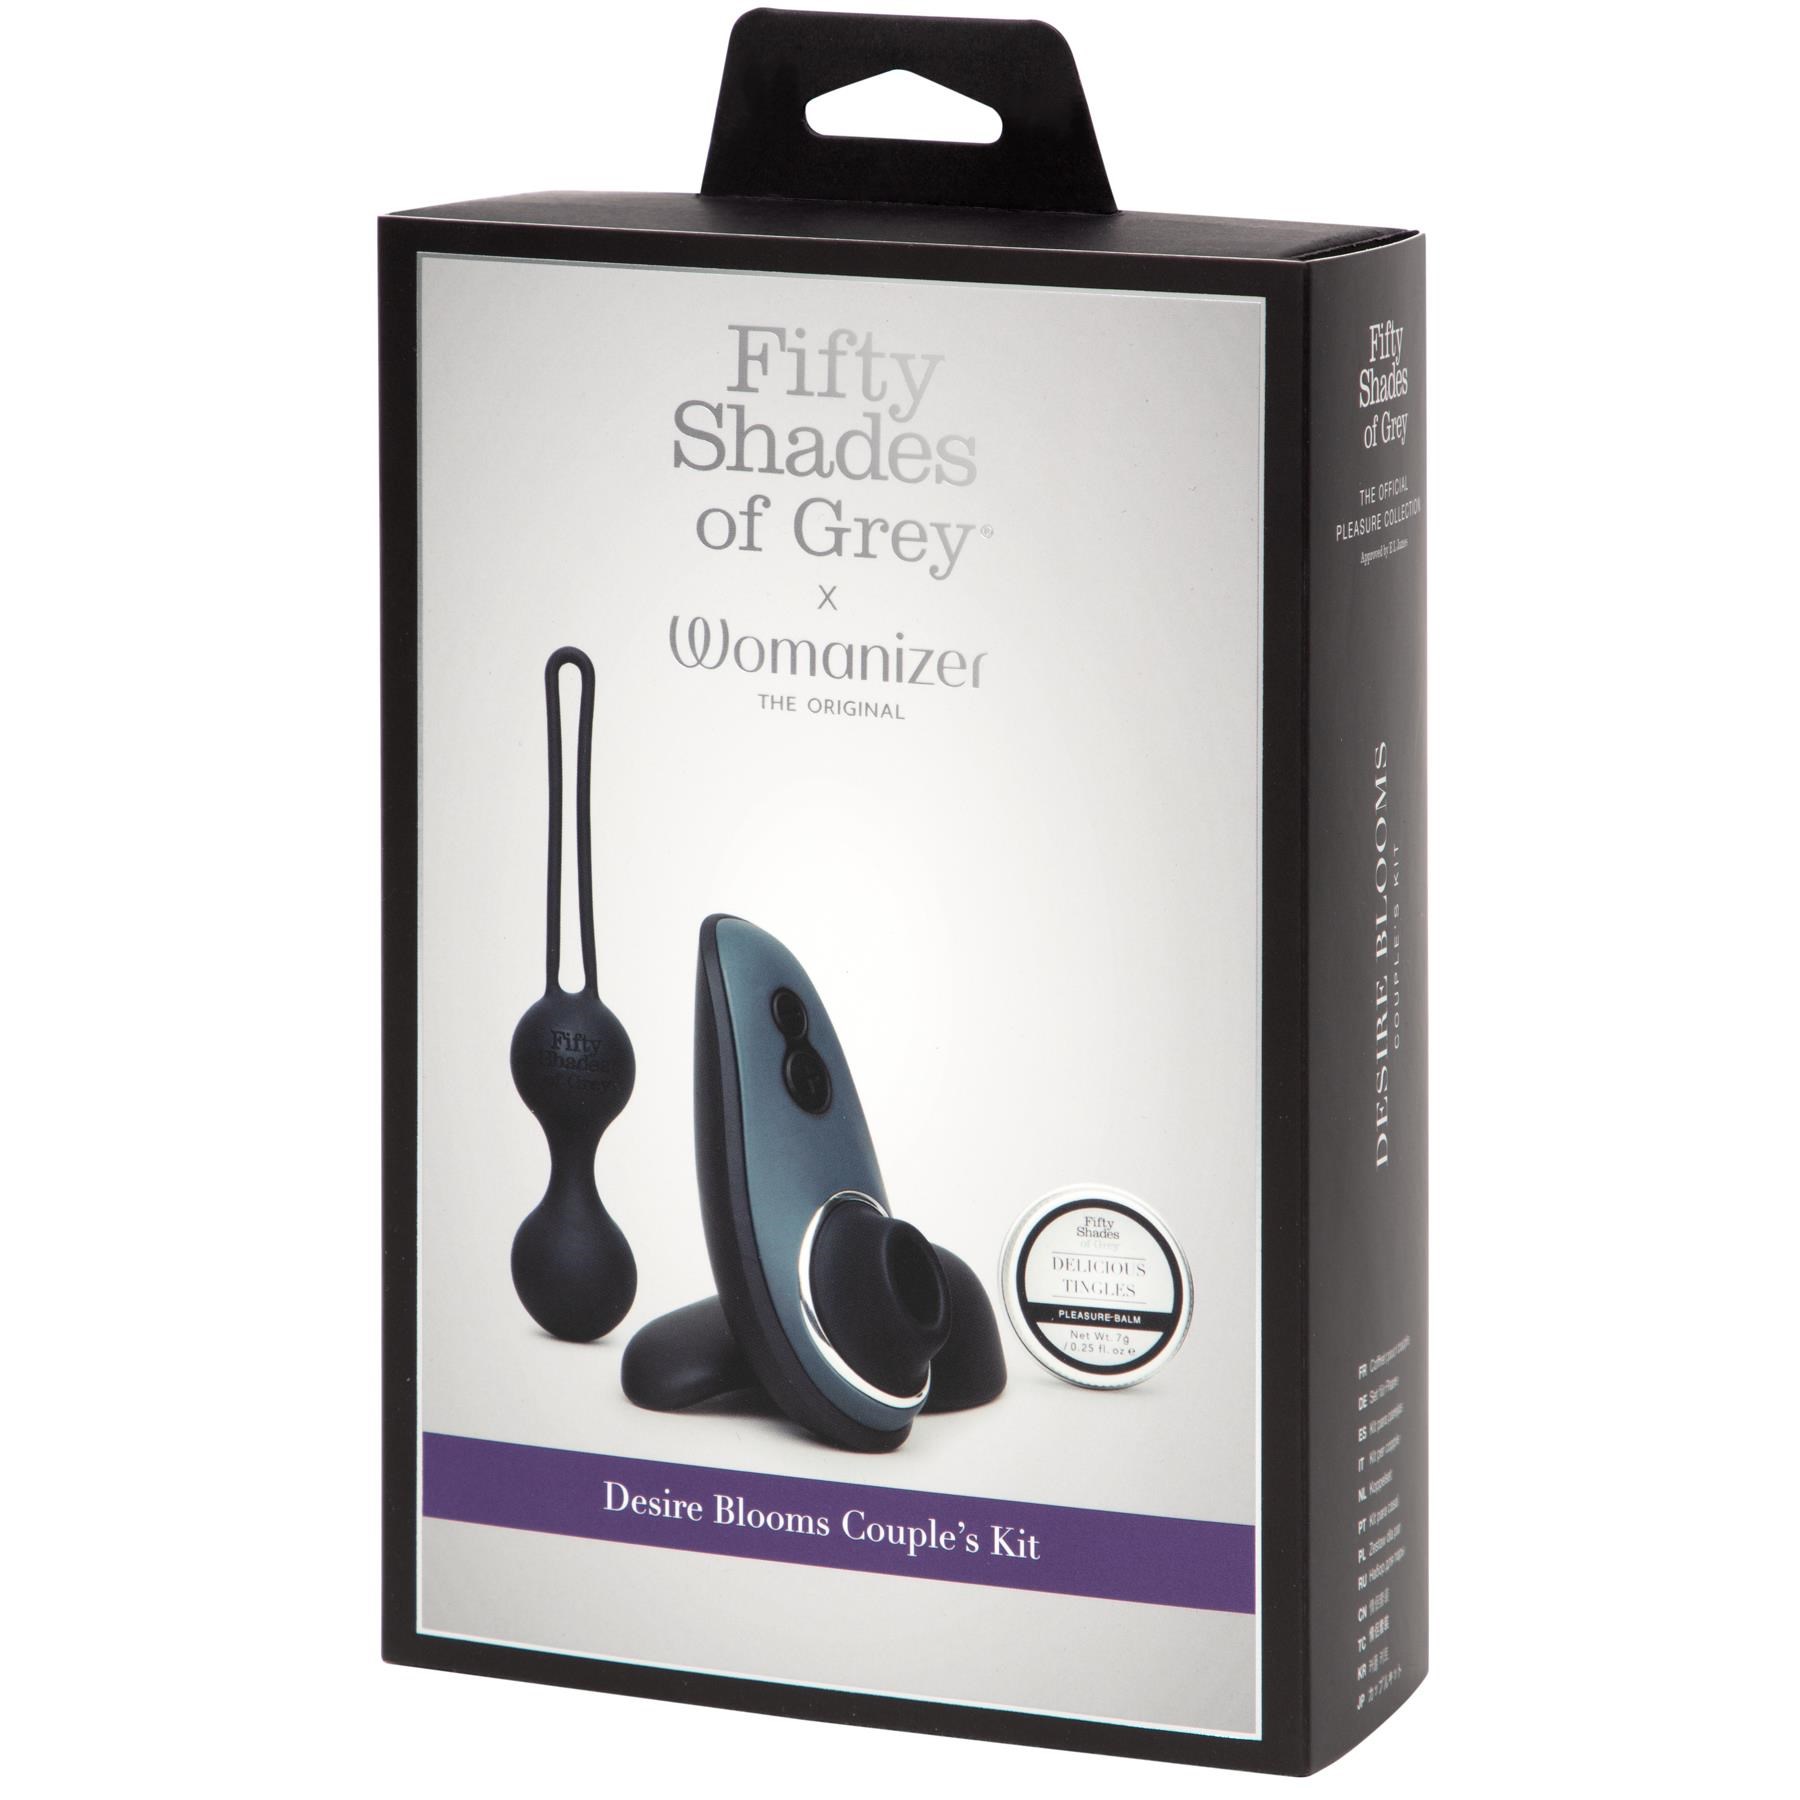 Fifty Shades of Grey & Womanizer Desire Blooms Couples Kit - Packaging